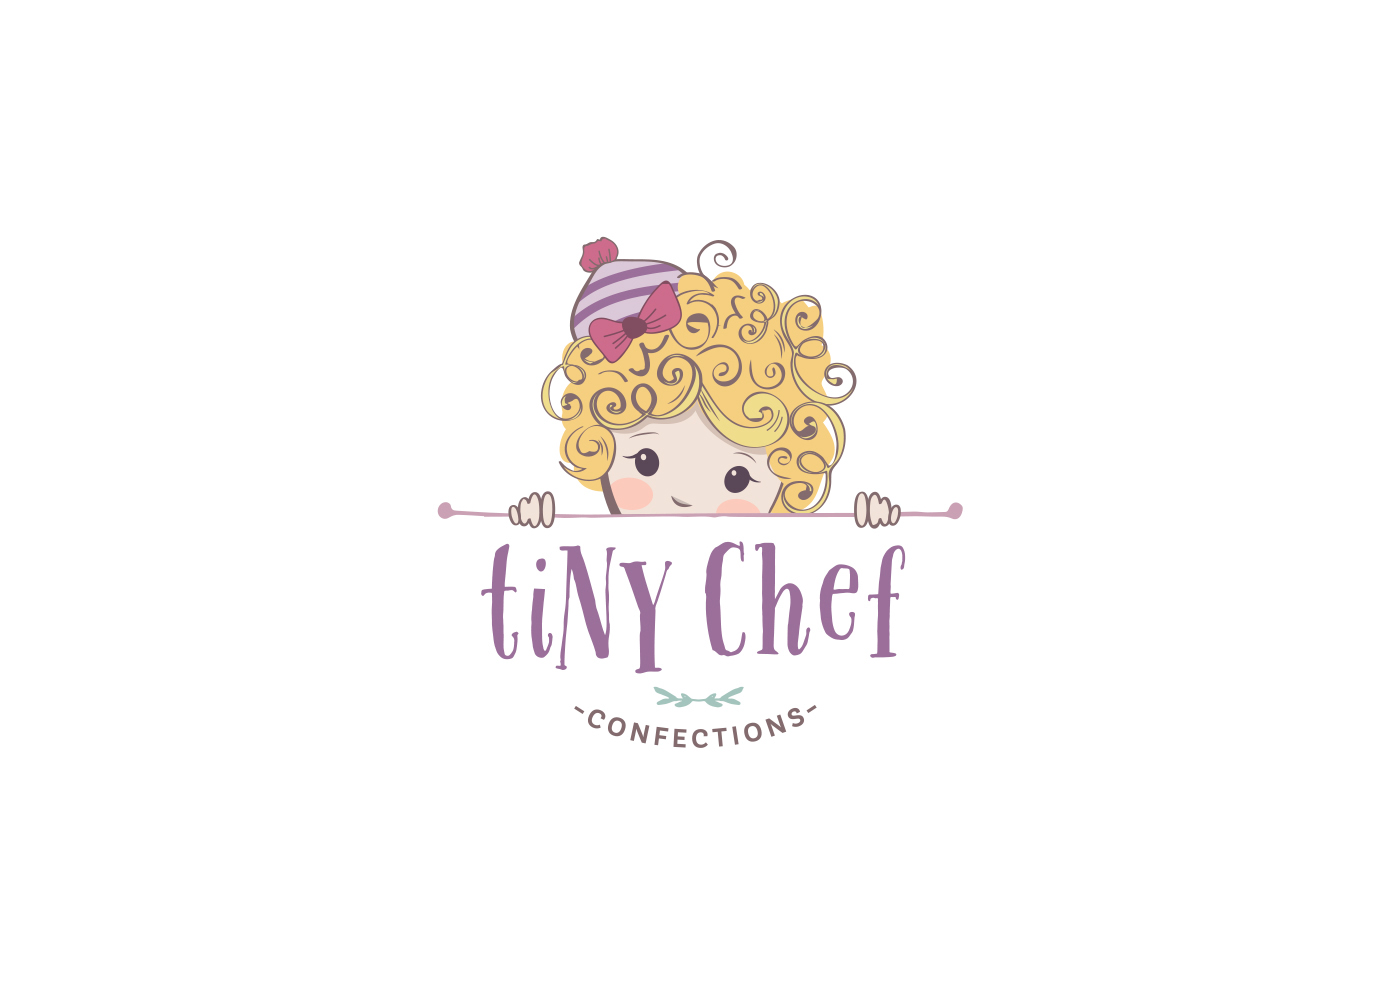 confections baker chef bakery logo business card ILLUSTRATION 